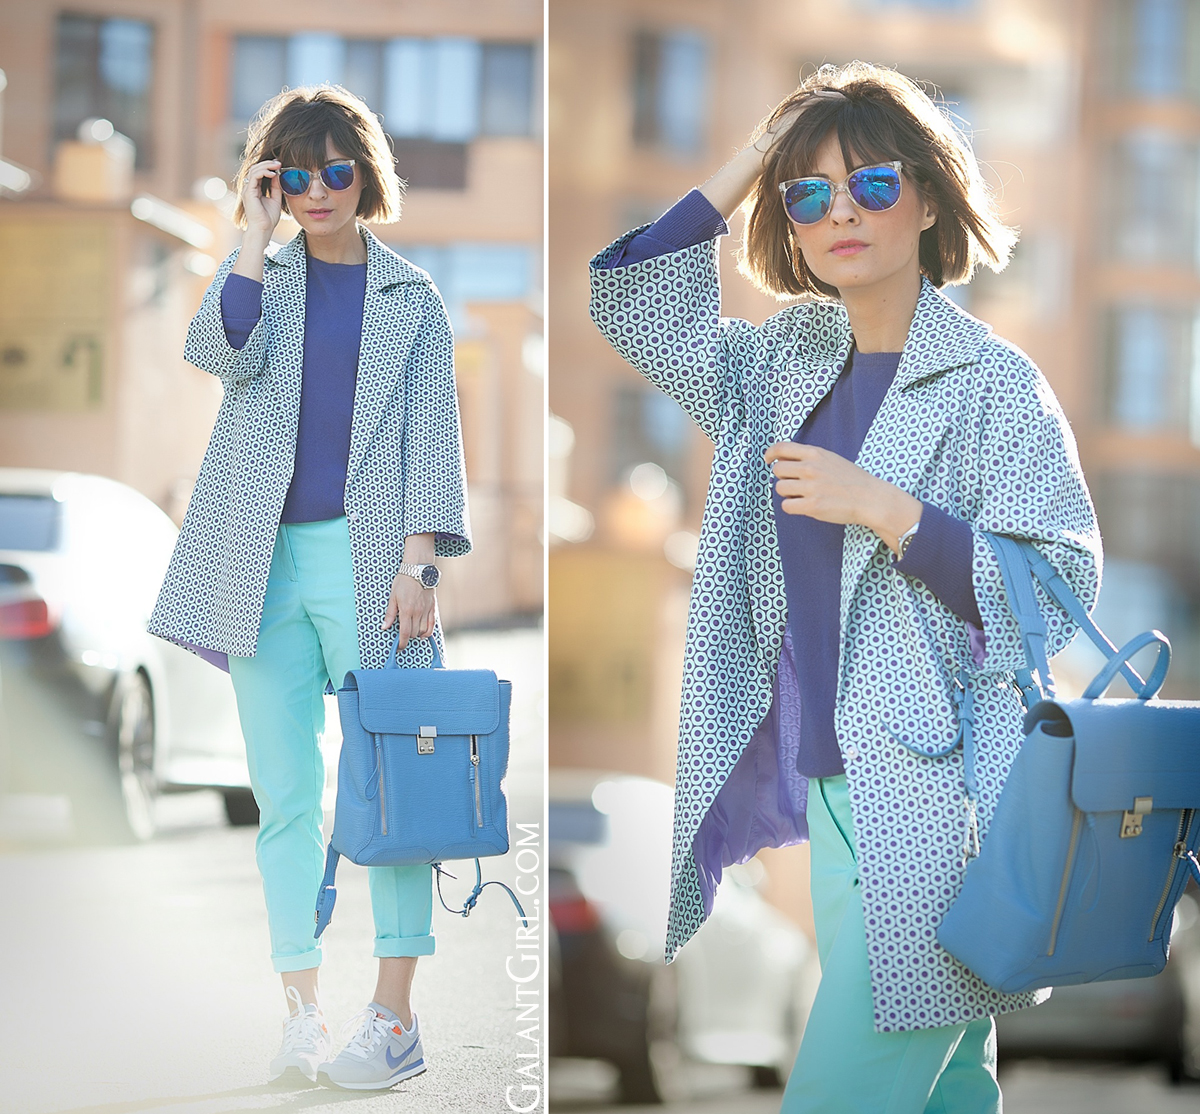 colorblocked outfit in blue colors with 3.1 Phillip Lim Pashli backpack on GalantGirl.com